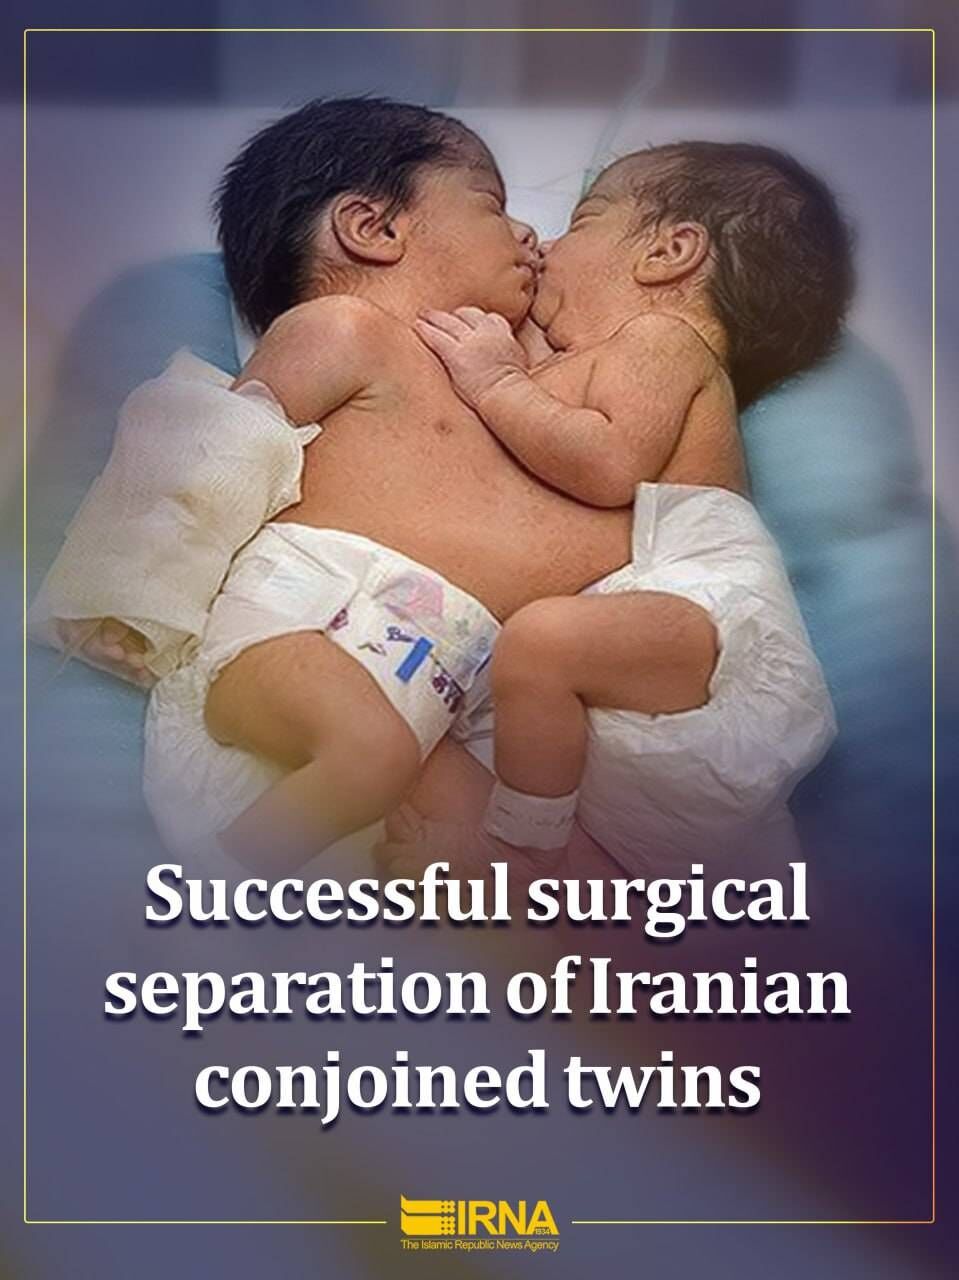 Successful separation operation of conjoined Iranian twins